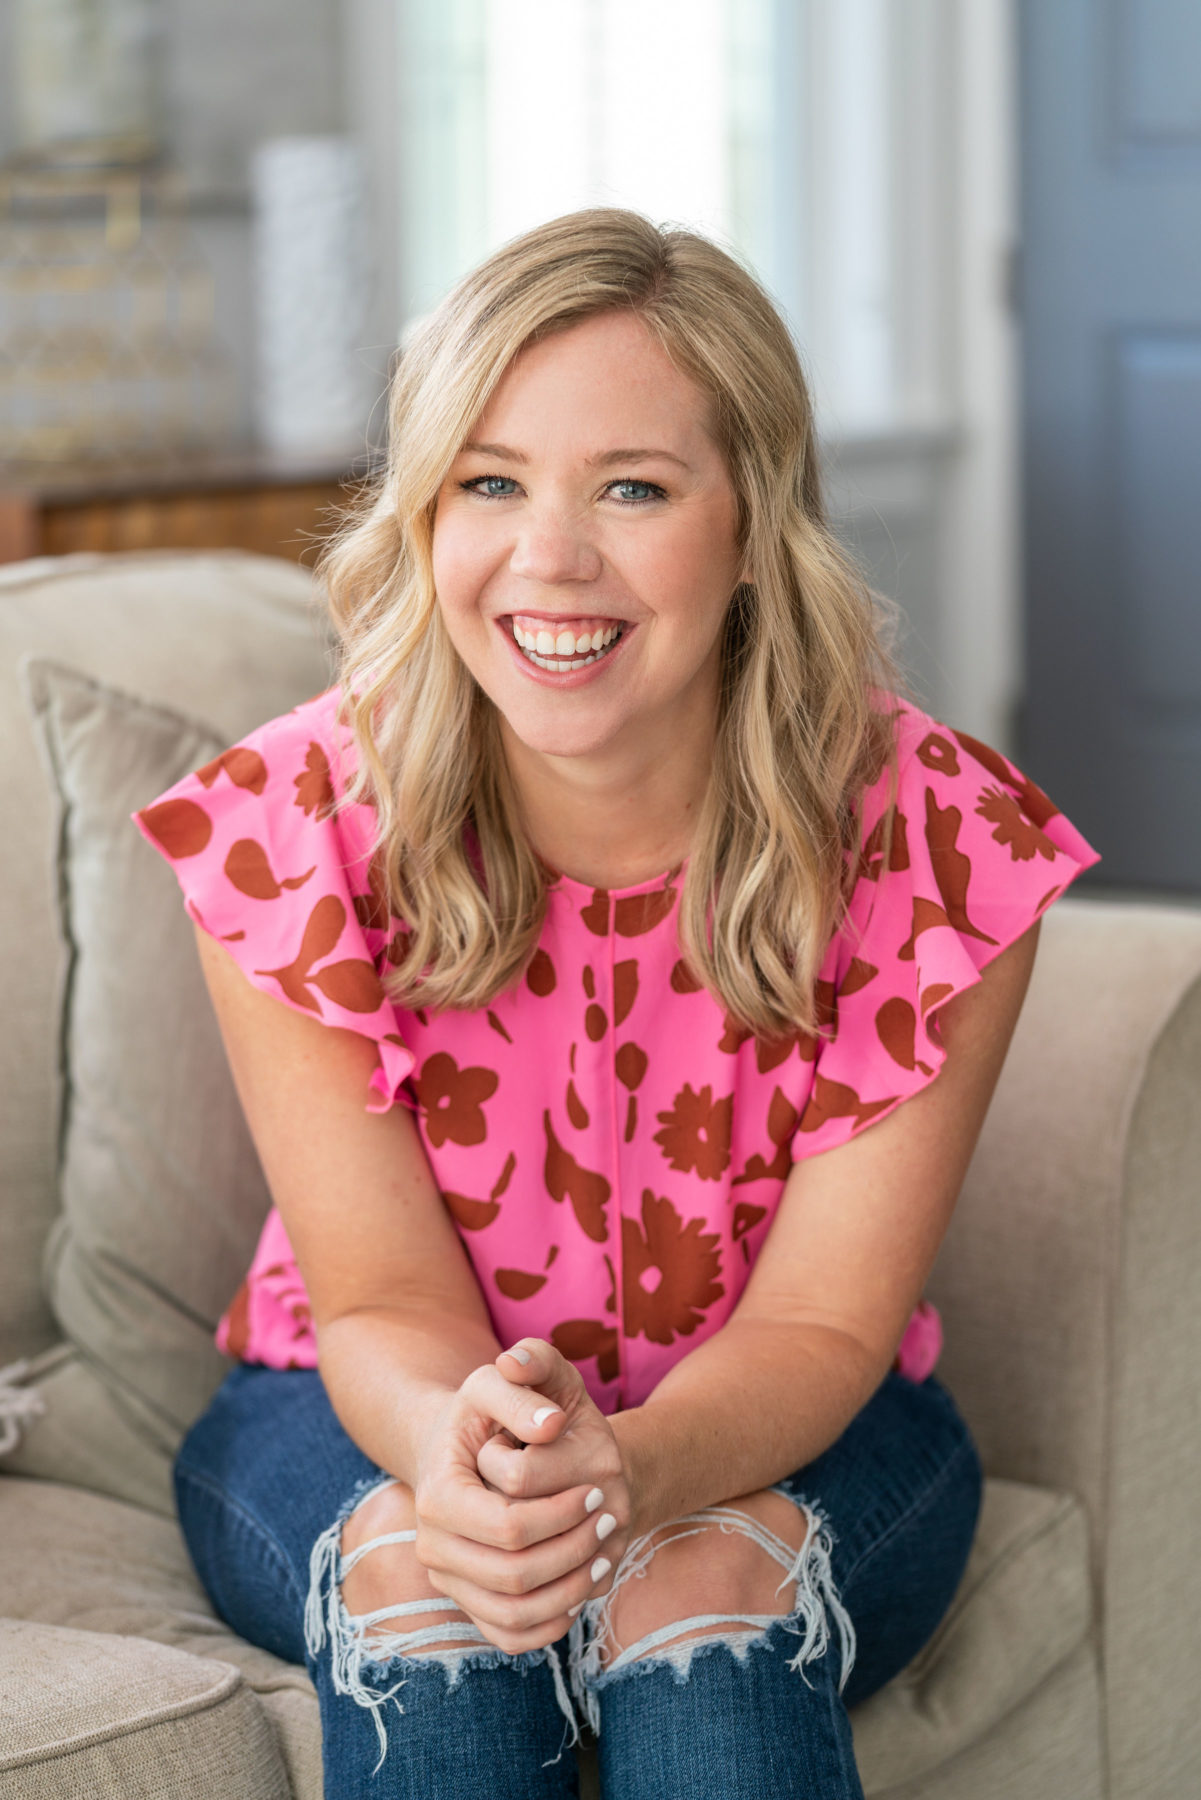 A personal branding portrait of a realtor. She is wearing a casual outfit for her brand photoshoot, a bright pink top patterned with flowers, and ripped jeans. 